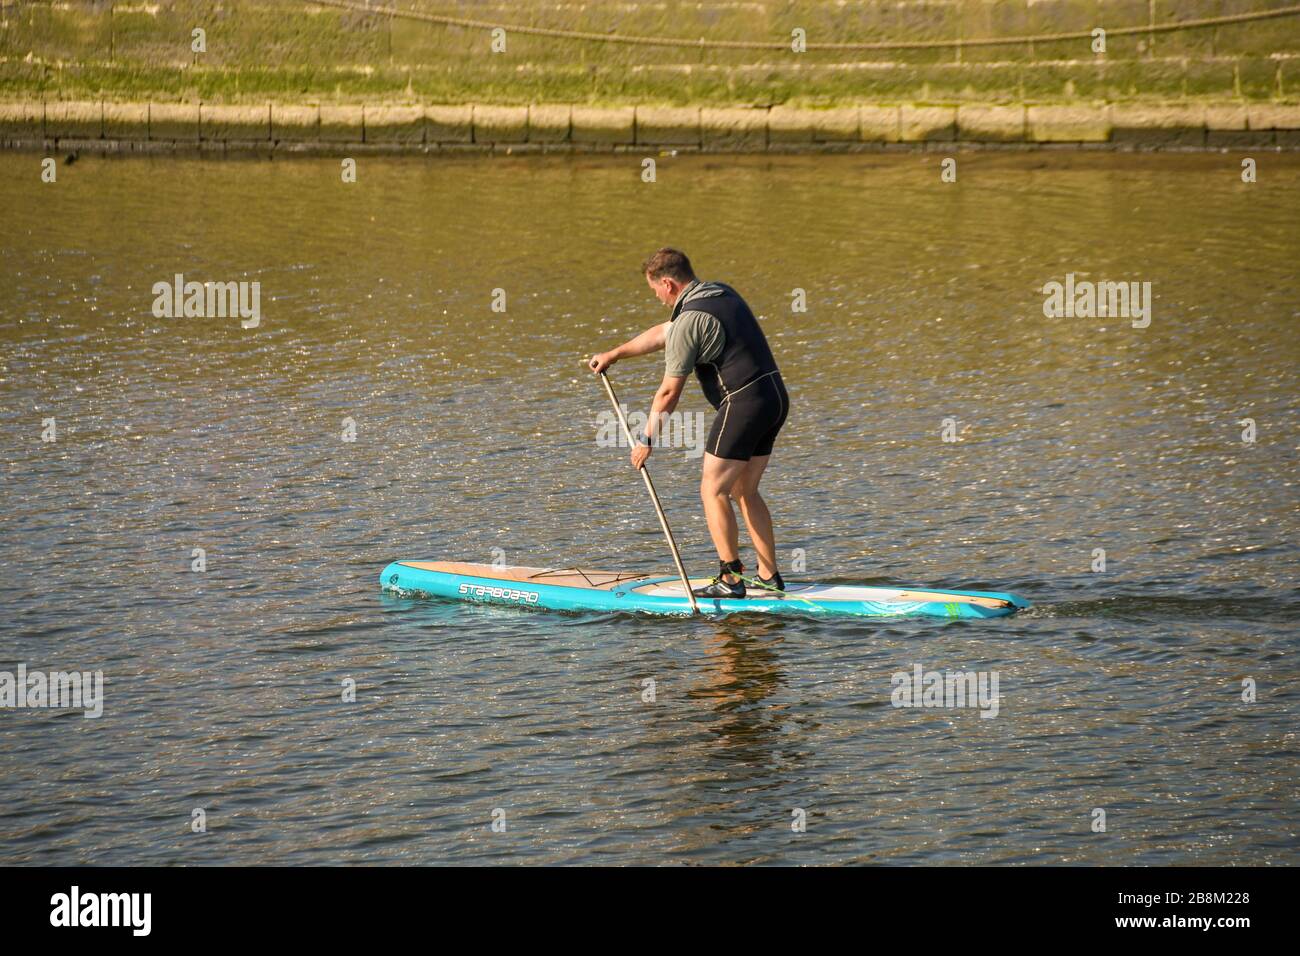 SWANSEA, WALES - JULY 2018: Person standing up on a paddle board on the River Tawe near Swansea marina Stock Photo